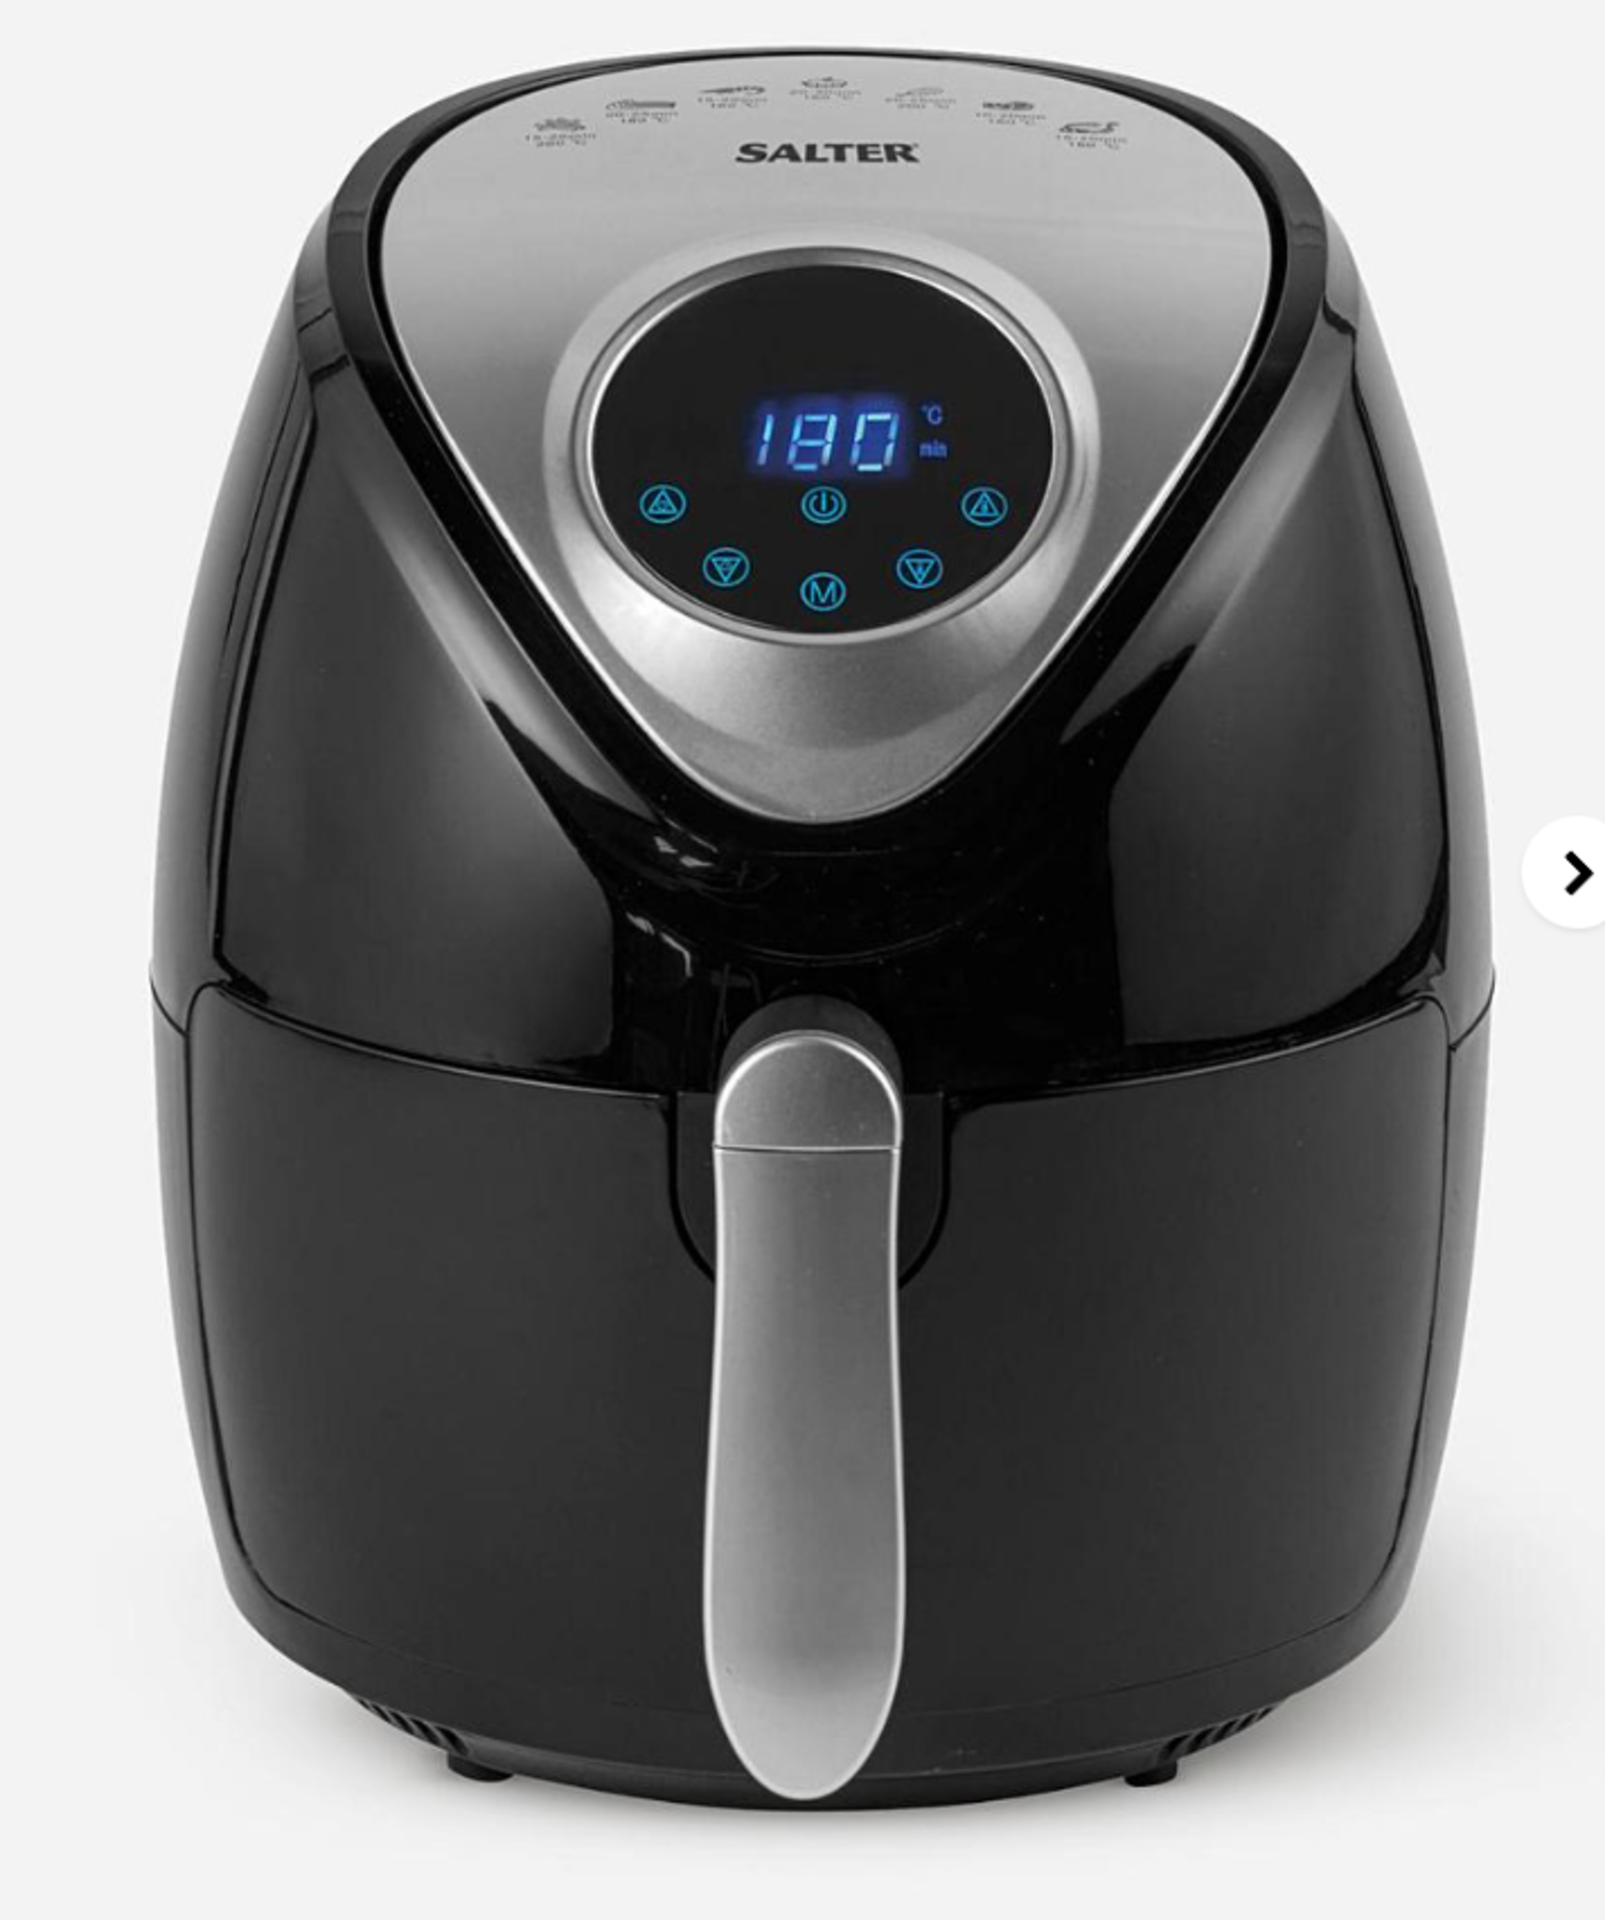 Salter 4.5L Digital Air Fryer. - ER22. This fantastic Salter Hot Air Fryer is the healthy way to